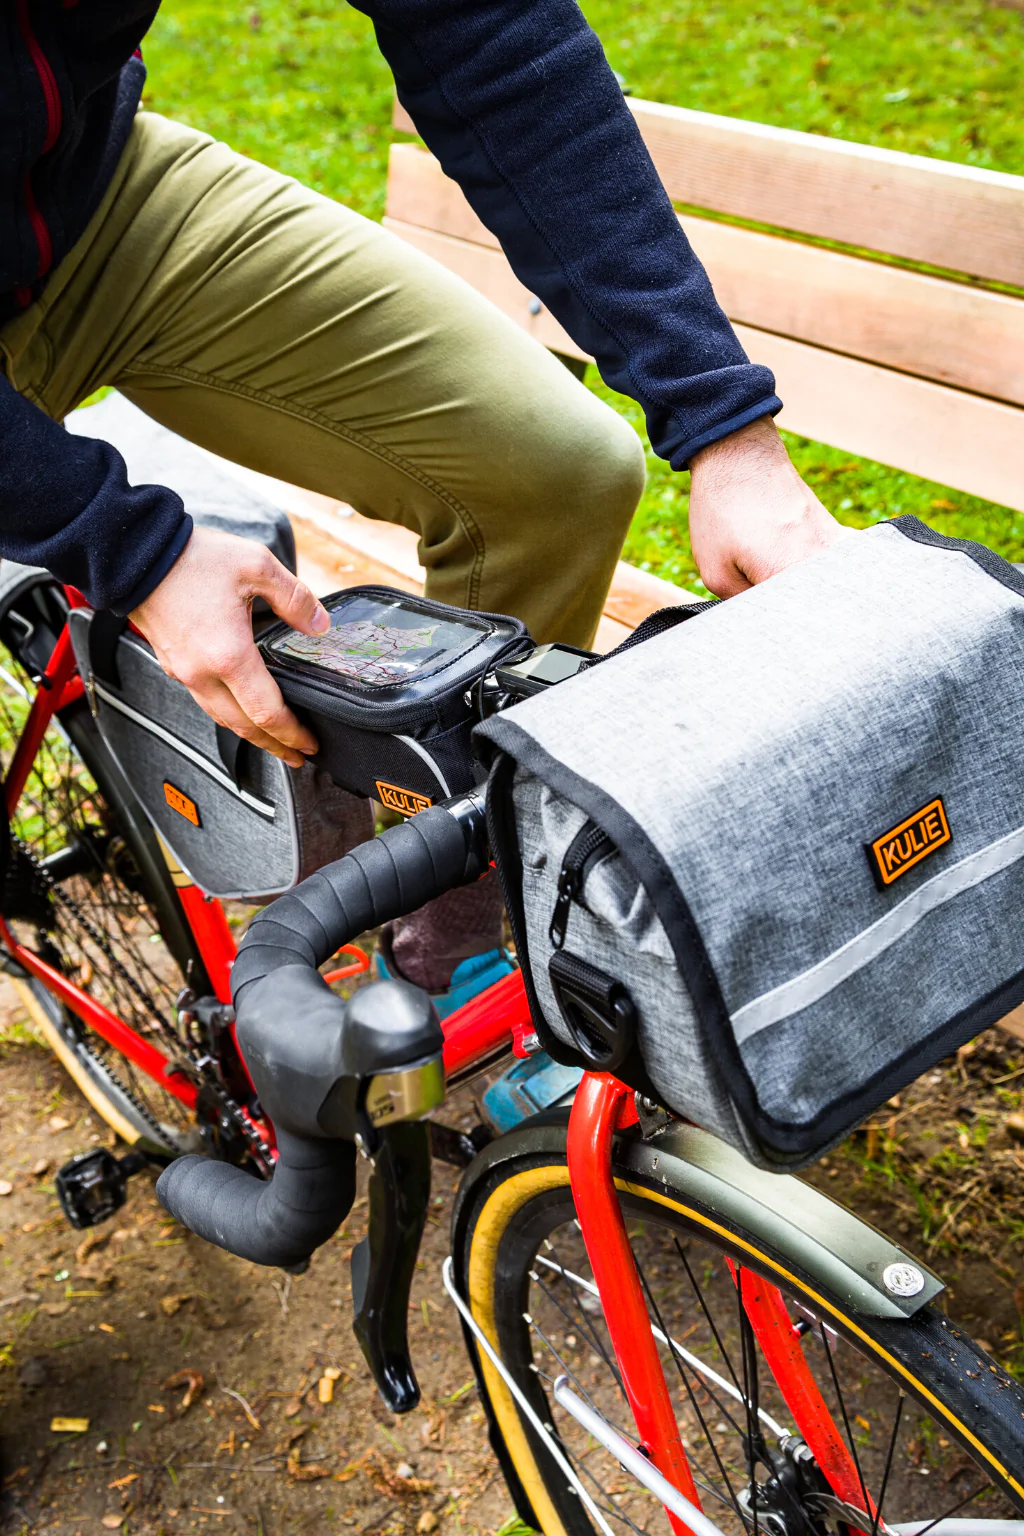 A close up shot of customized storage bags on attached to a bicycle.